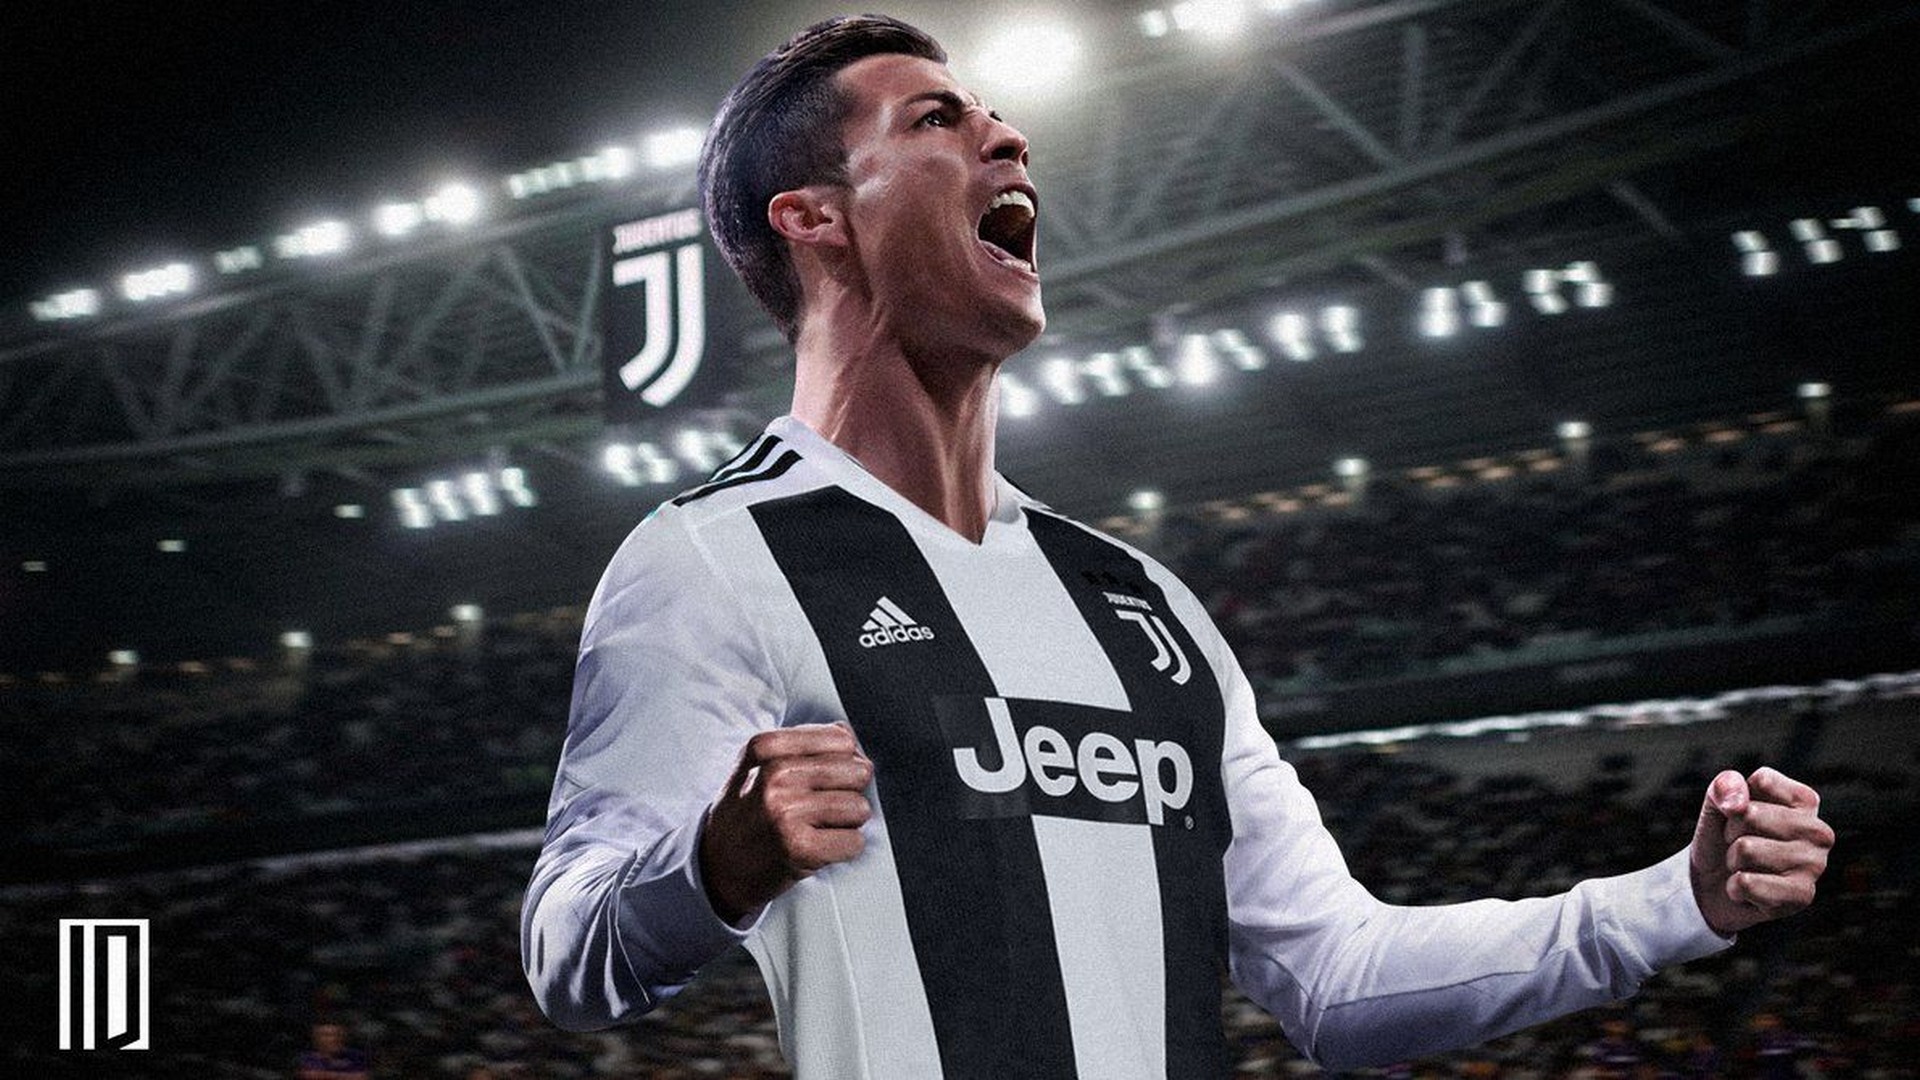 Cristiano Ronaldo Juventus Background Wallpaper HD with image resolution 1920x1080 pixel. You can make this wallpaper for your Desktop Computer Backgrounds, Mac Wallpapers, Android Lock screen or iPhone Screensavers